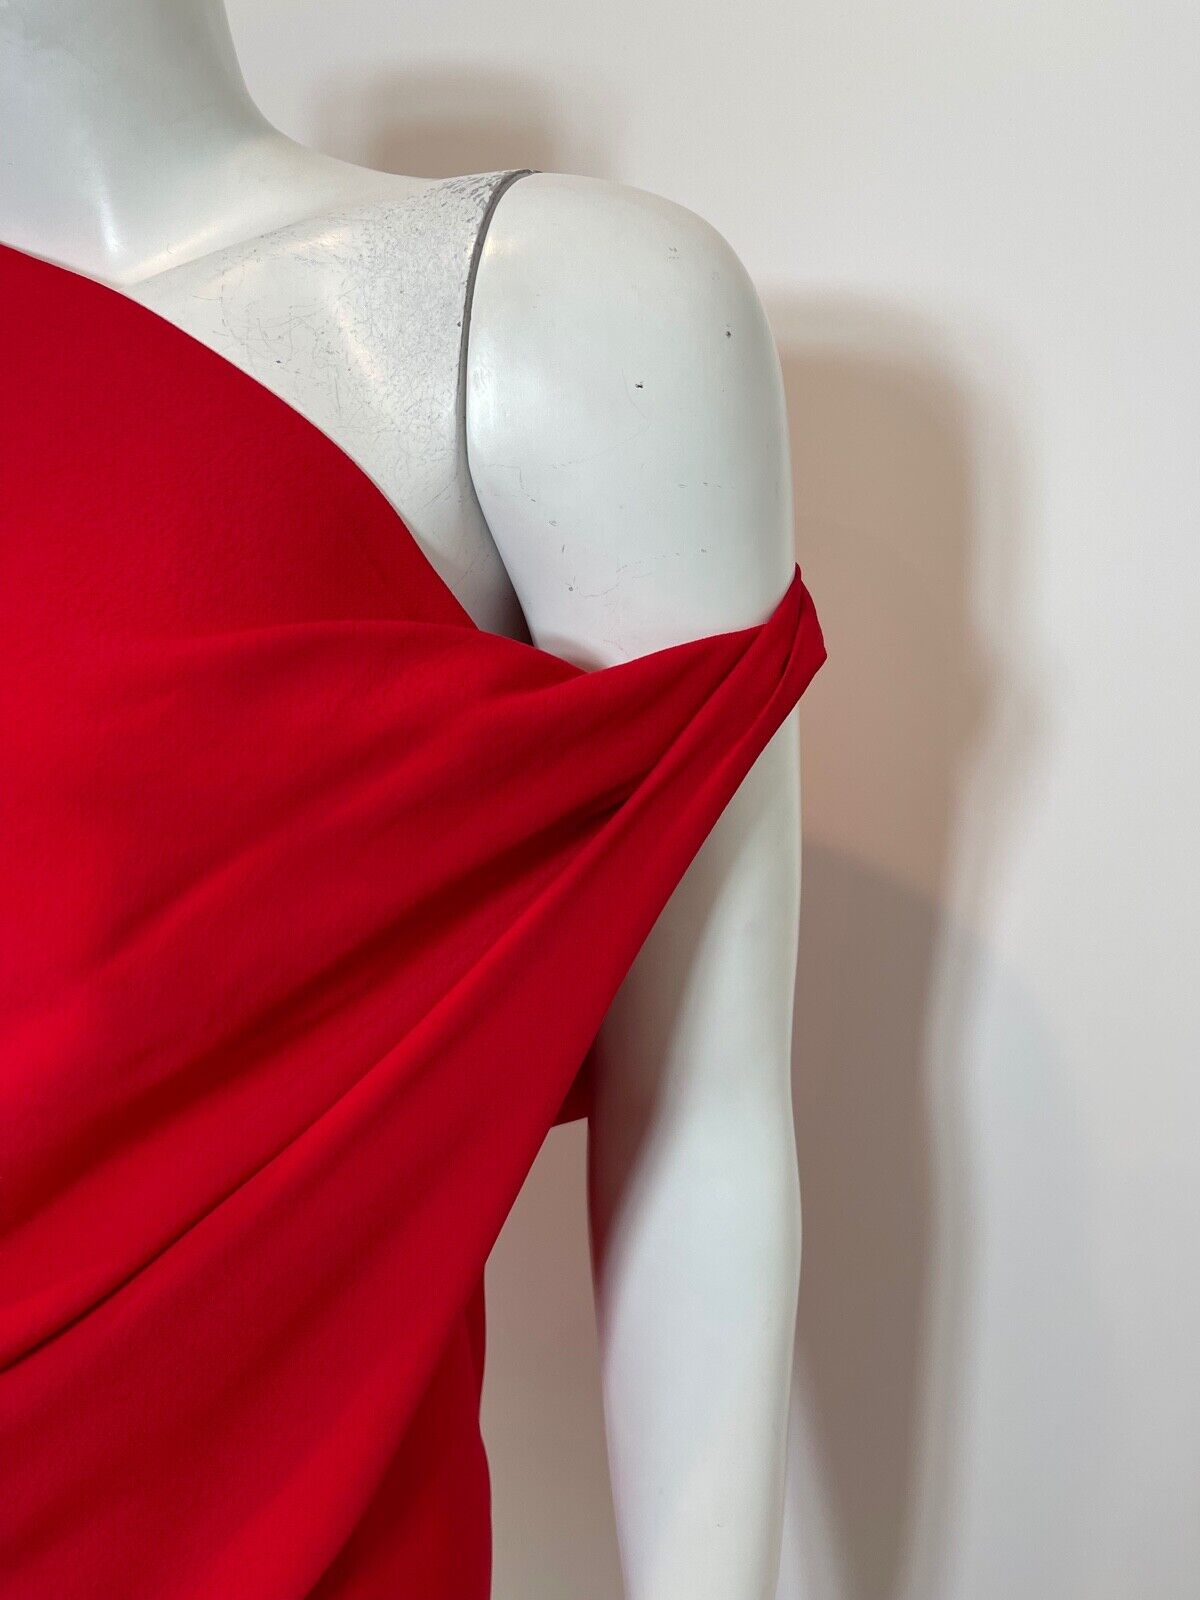 Vivienne Westwood Anglomania Drape Top in Red Size IT 40